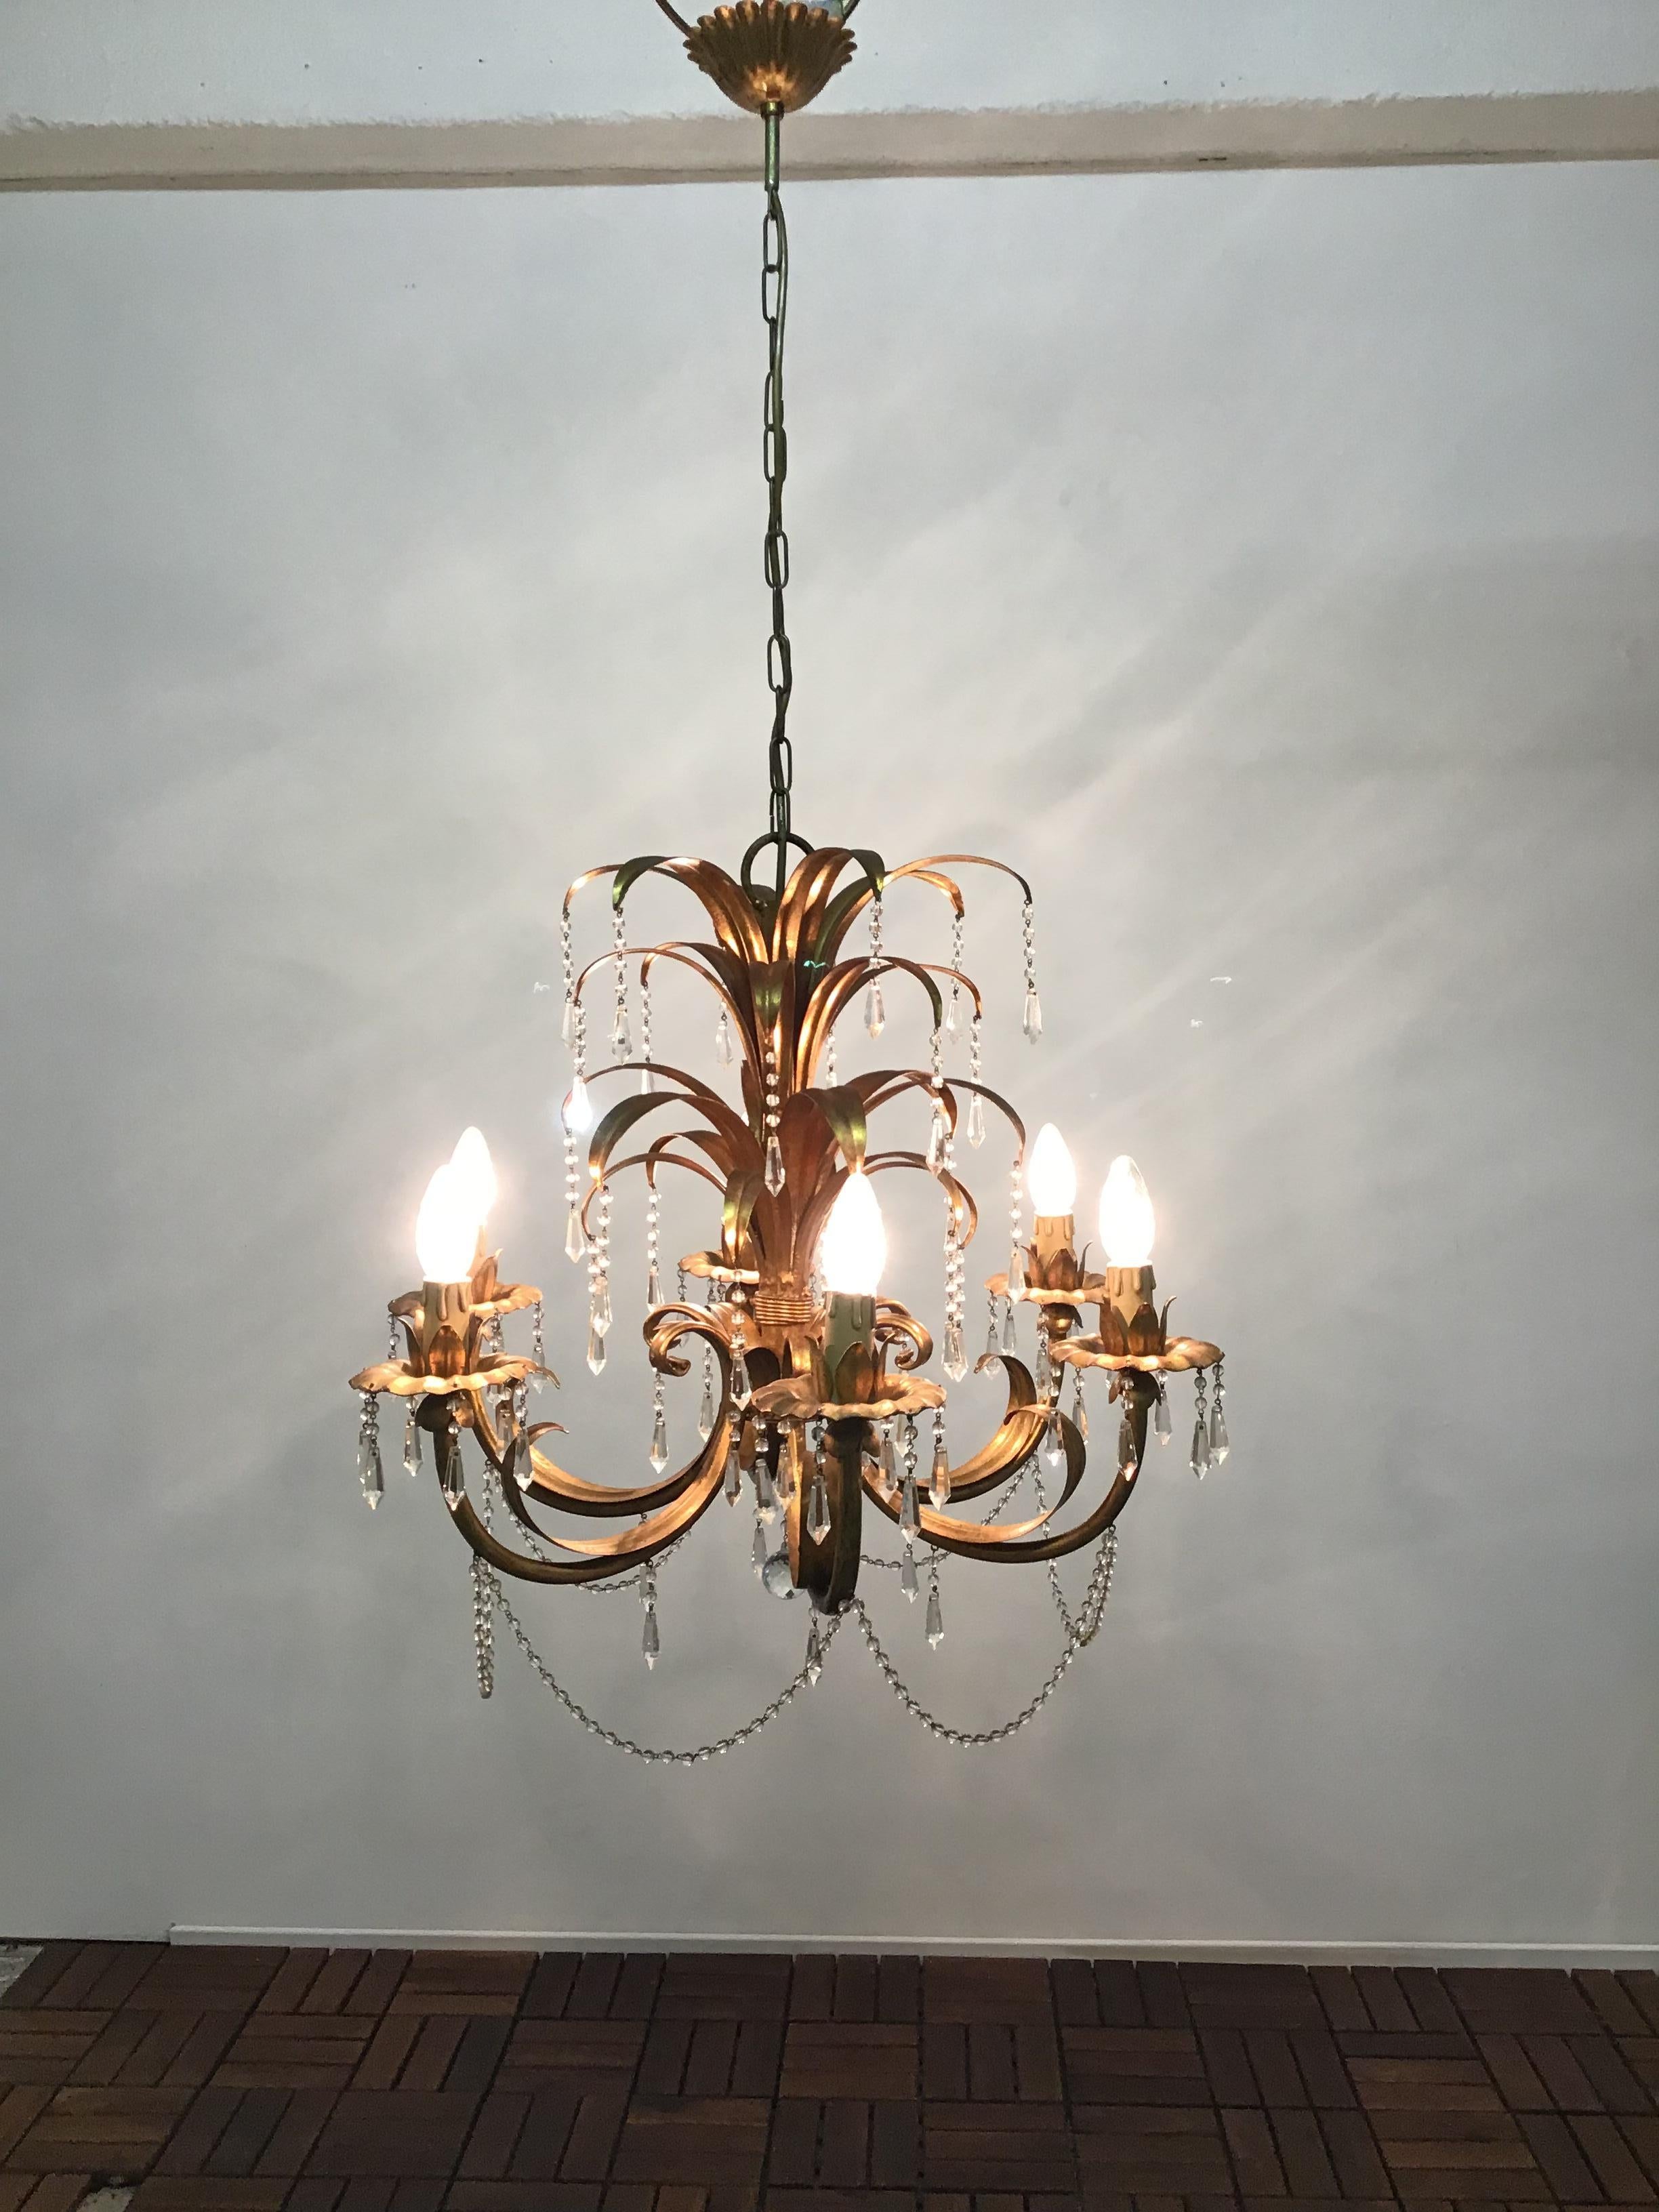 A mid-century six-light palm tree chandelier, circa 1960s.
This chandelier is made of gilt iron, decorated with crystal pearls.
Socket: Six e 14 (Edison) for standard screw bulbs.
Excellent condition.